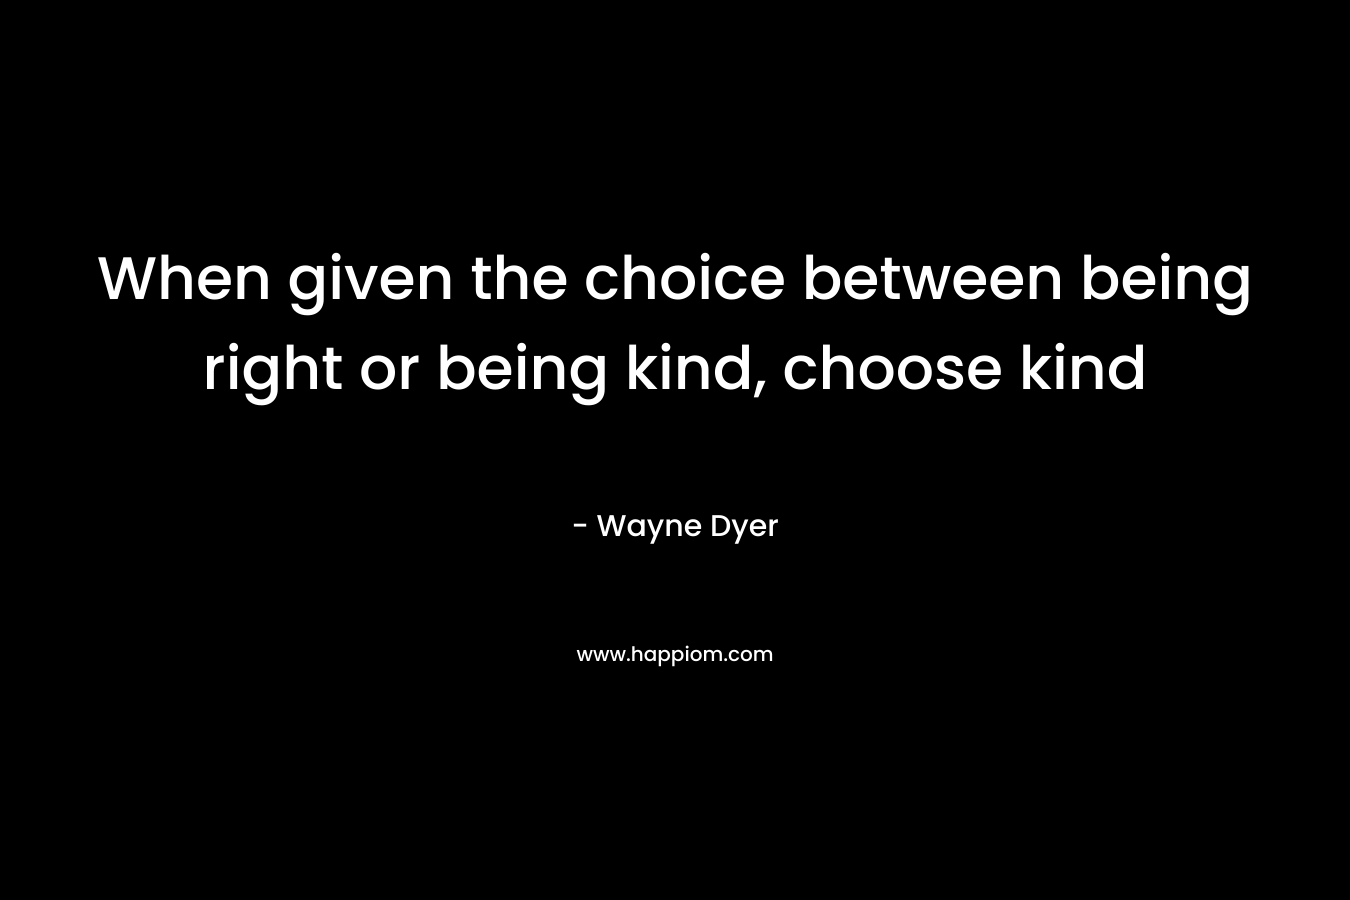 When given the choice between being right or being kind, choose kind